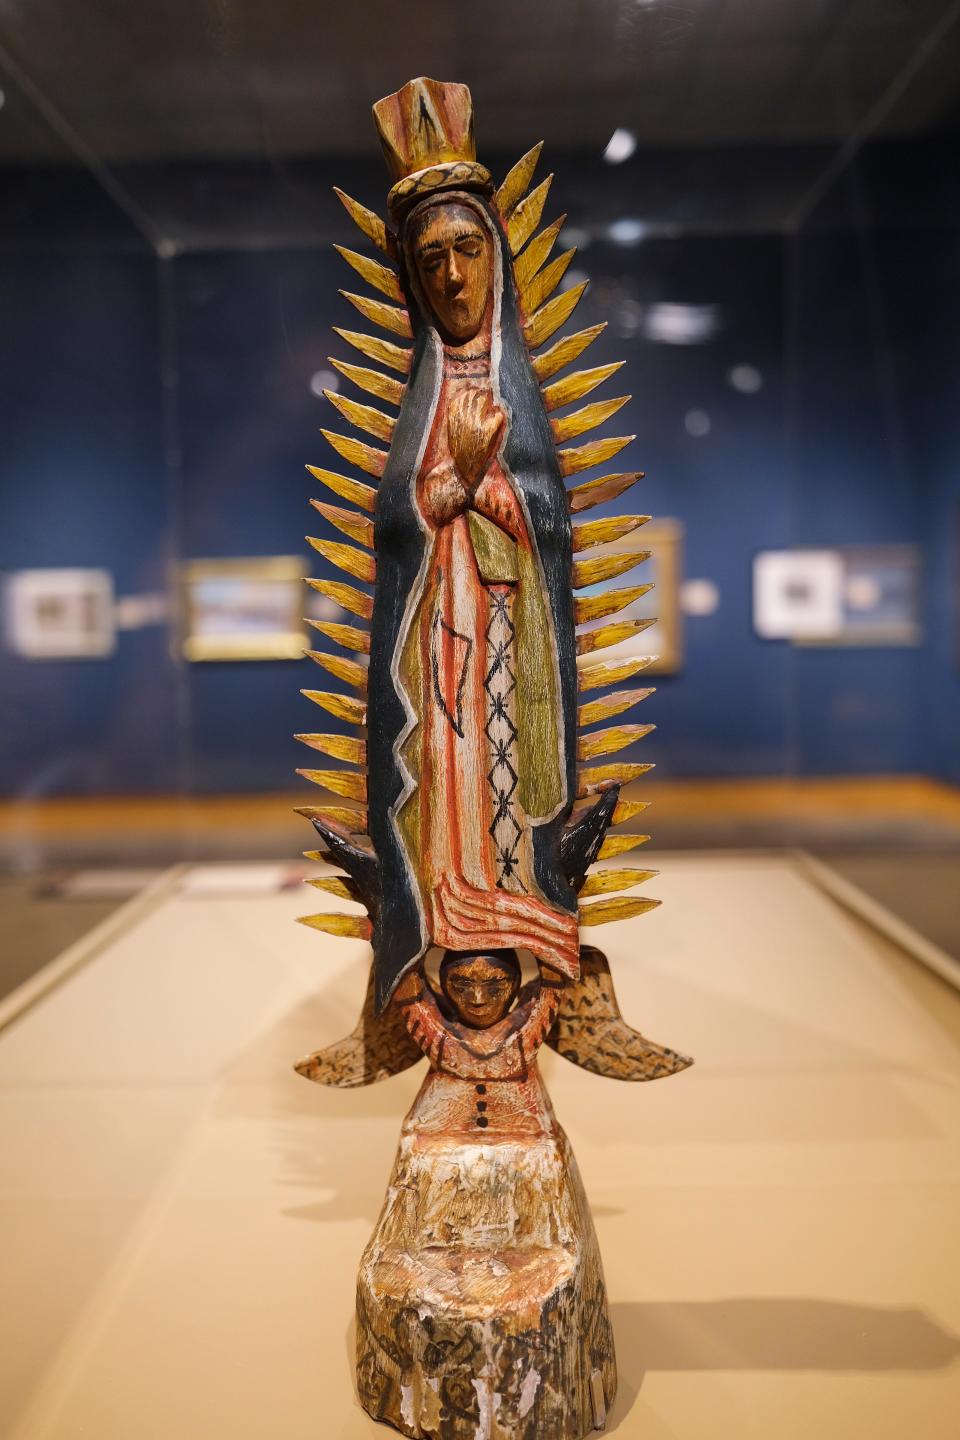 Frank Applegate's "Our Lady of Guadalupe," from 1924, is featured in "New Beginnings: An American Story of Romantics and Modernists in the West" Monday, September 27, 2021 at the National Cowboy and Western Heritage Museum.